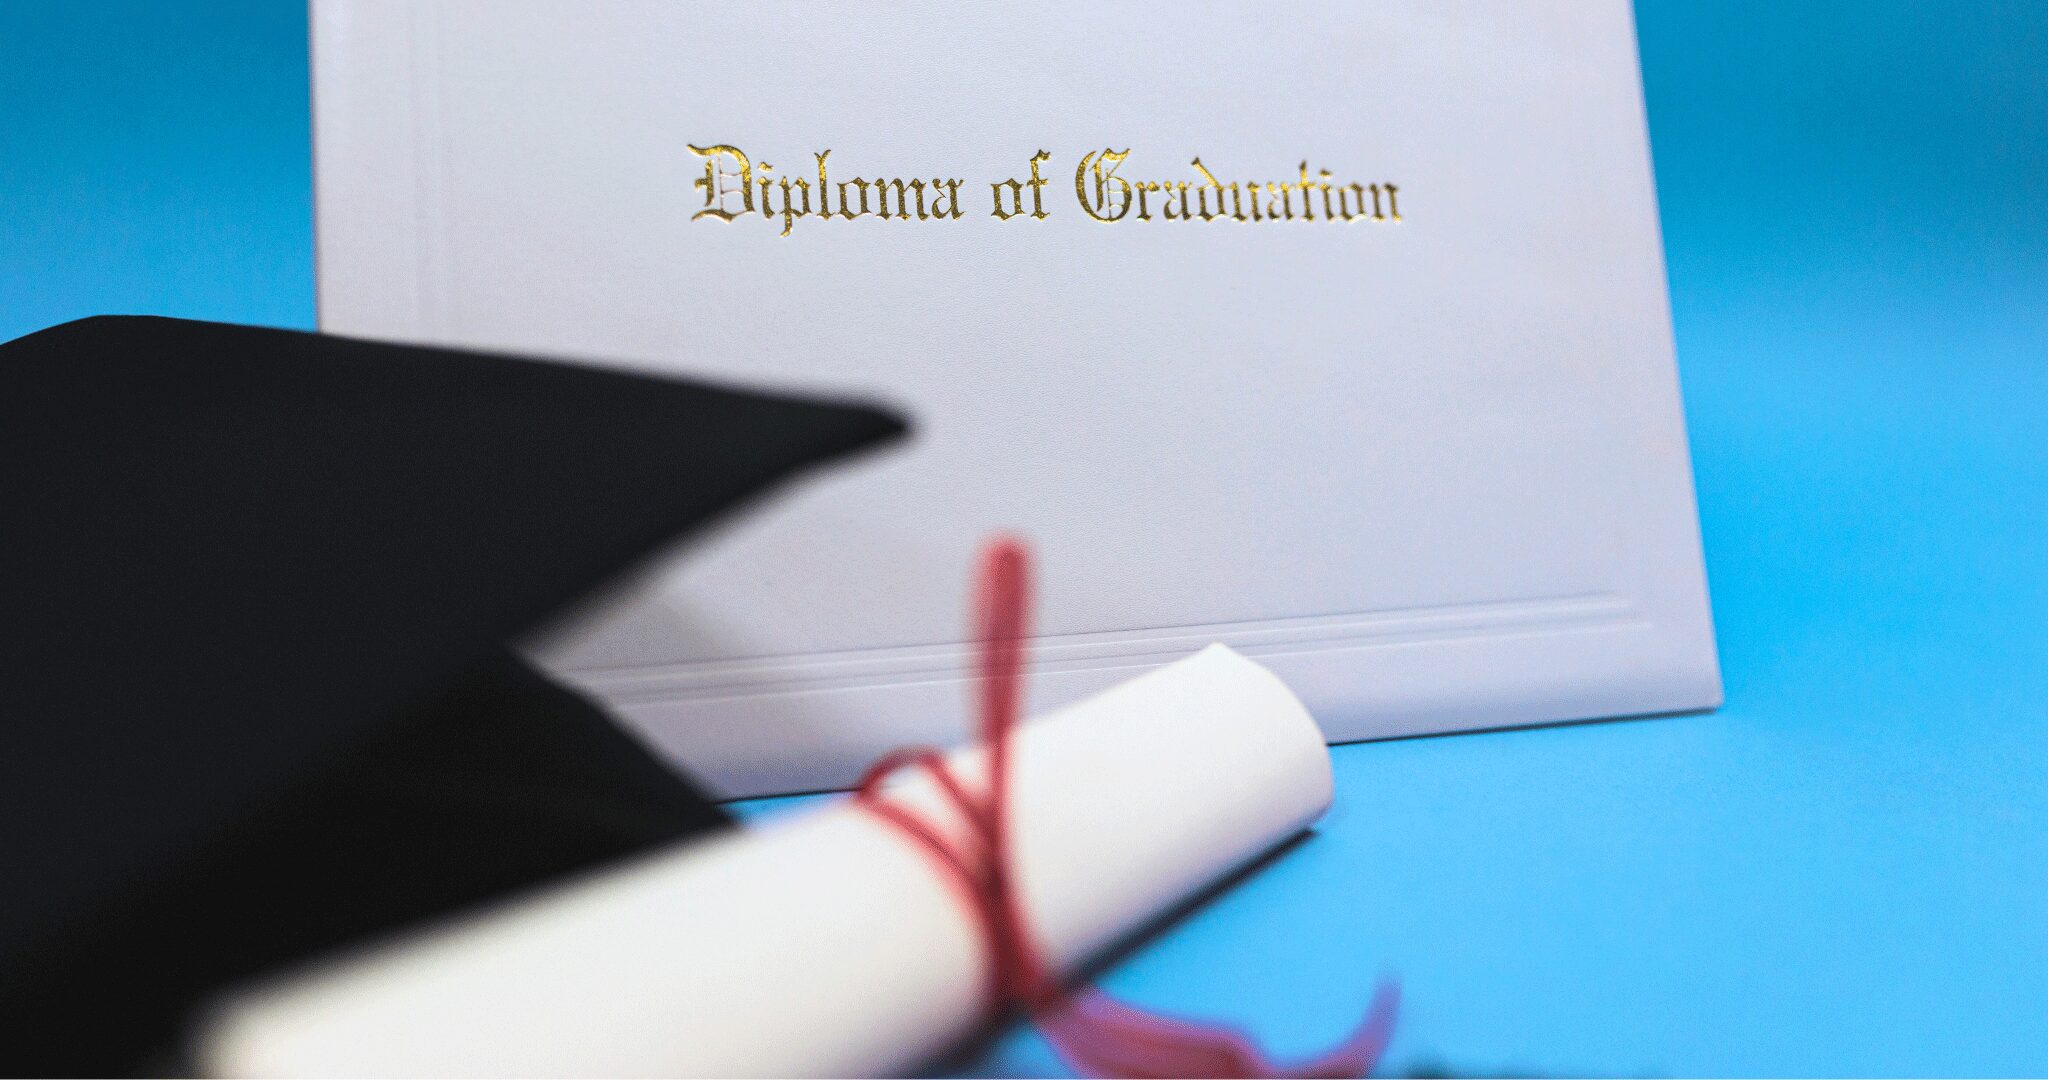 An image of a Gradiation Diploma with a graduation cap on a blue background